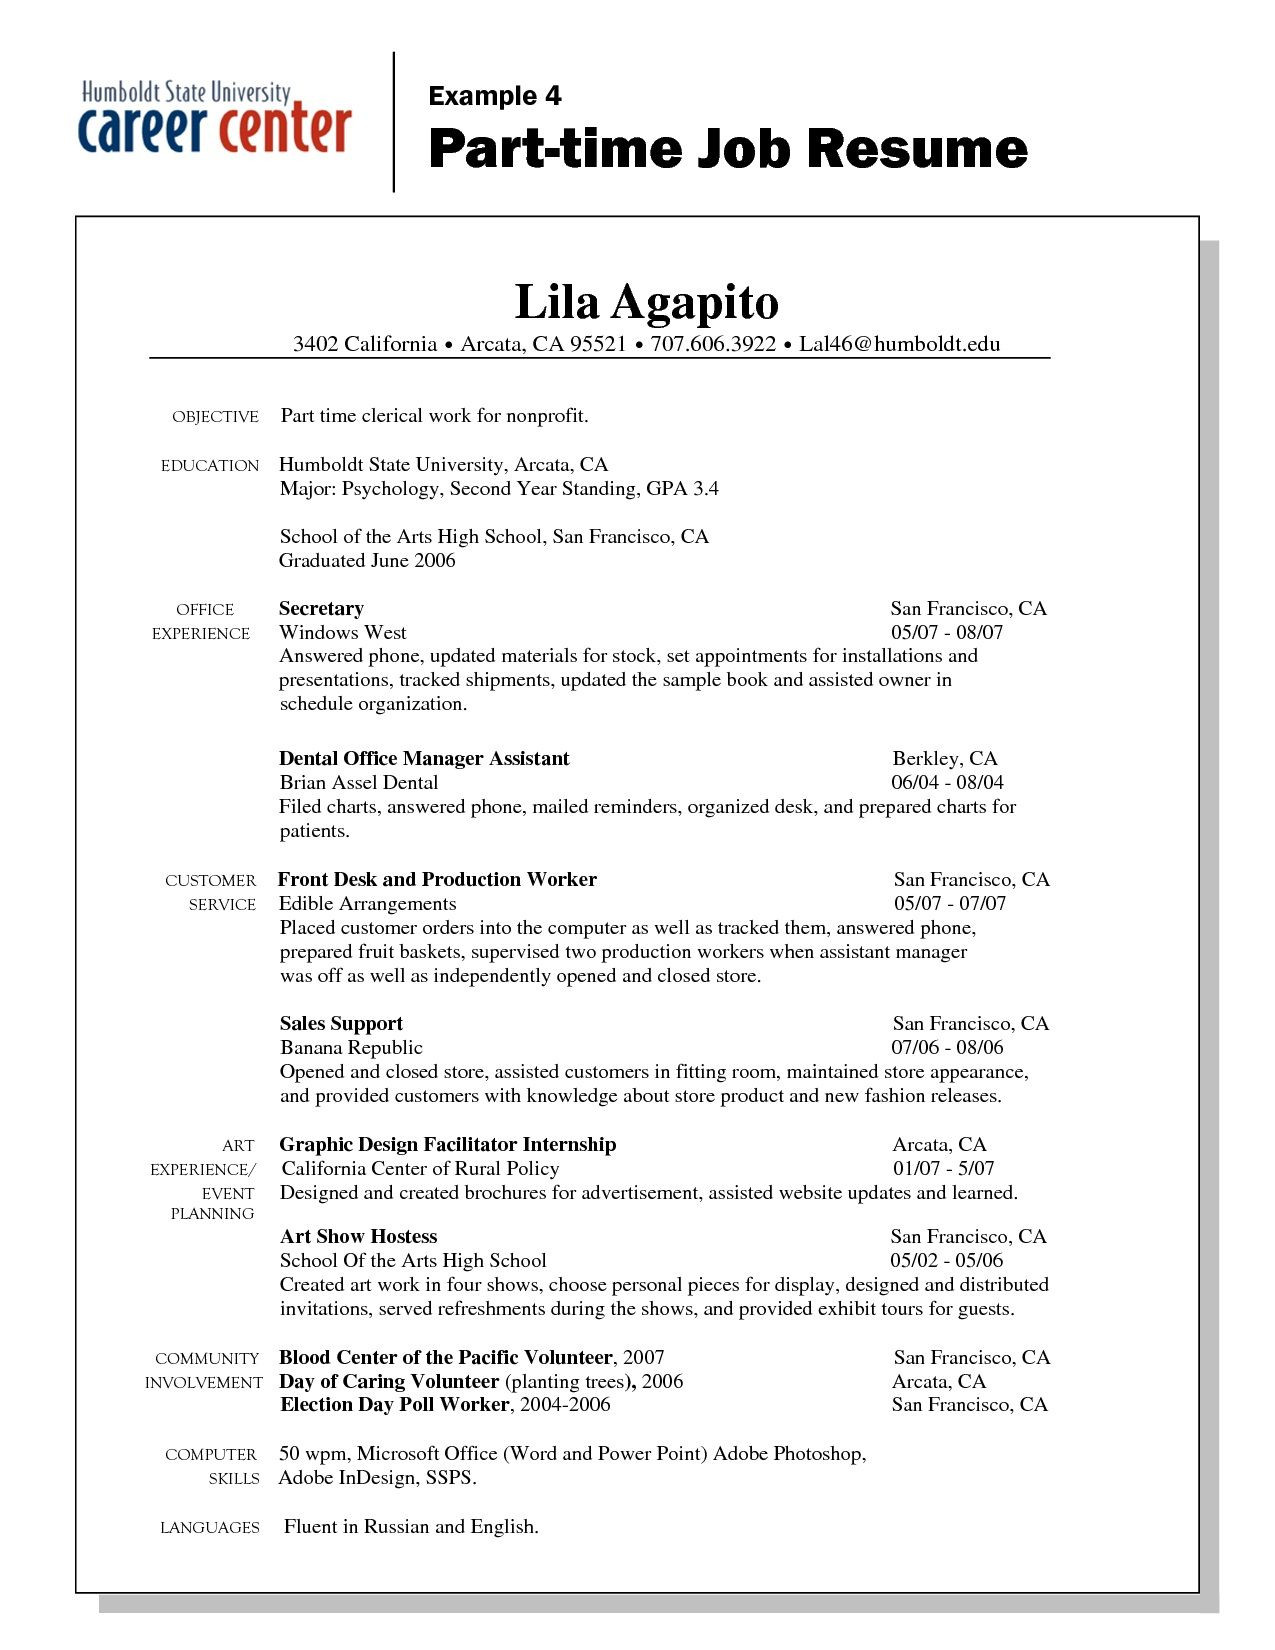 Sample Resume with Part Time Job Experience Job Part Time Resume Examples Job Resume, Job Resume Template …